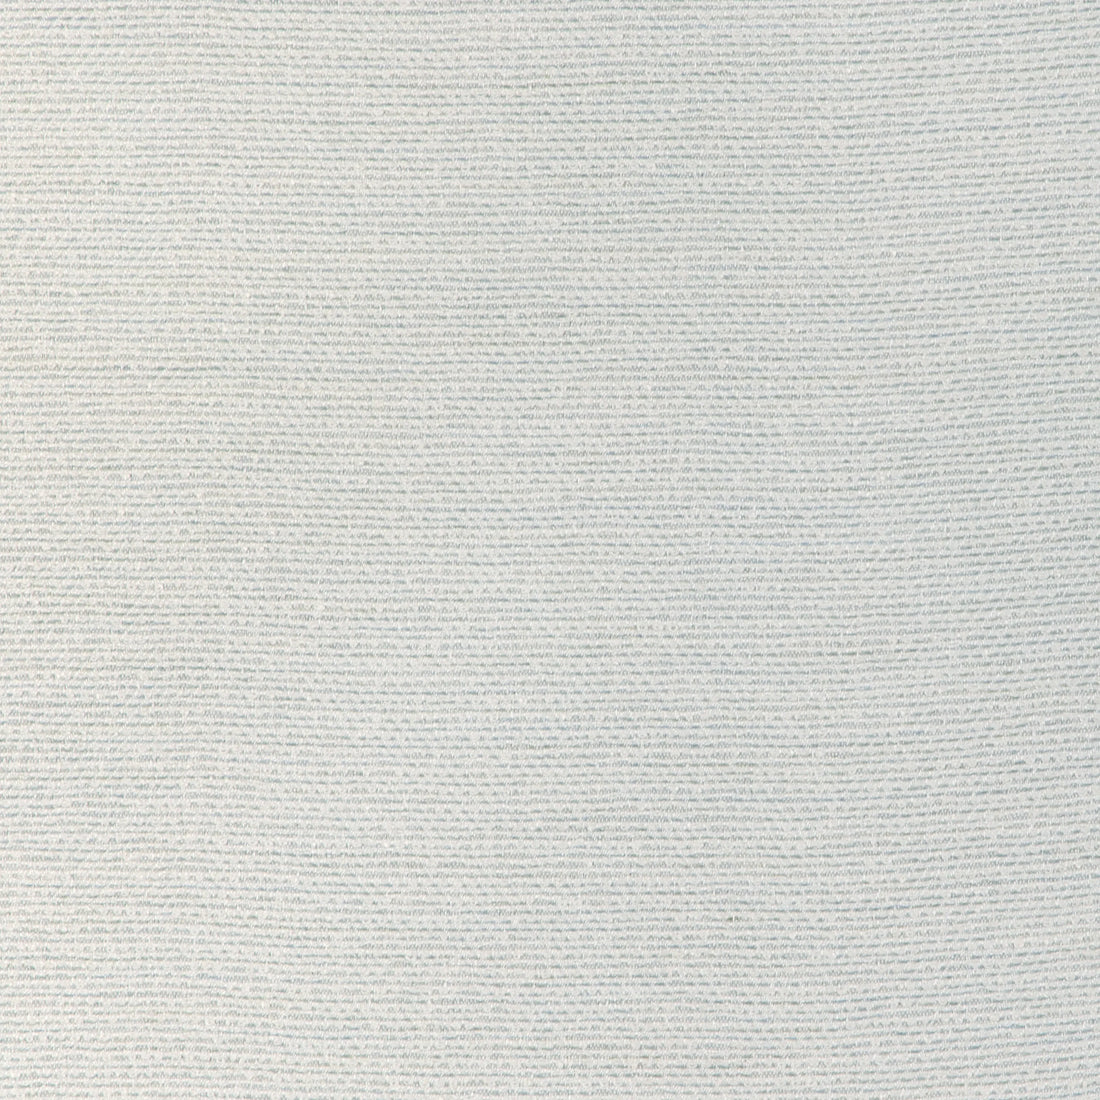 Chatham Texture fabric in seaglass color - pattern 36935.15.0 - by Kravet Couture in the Riviera collection